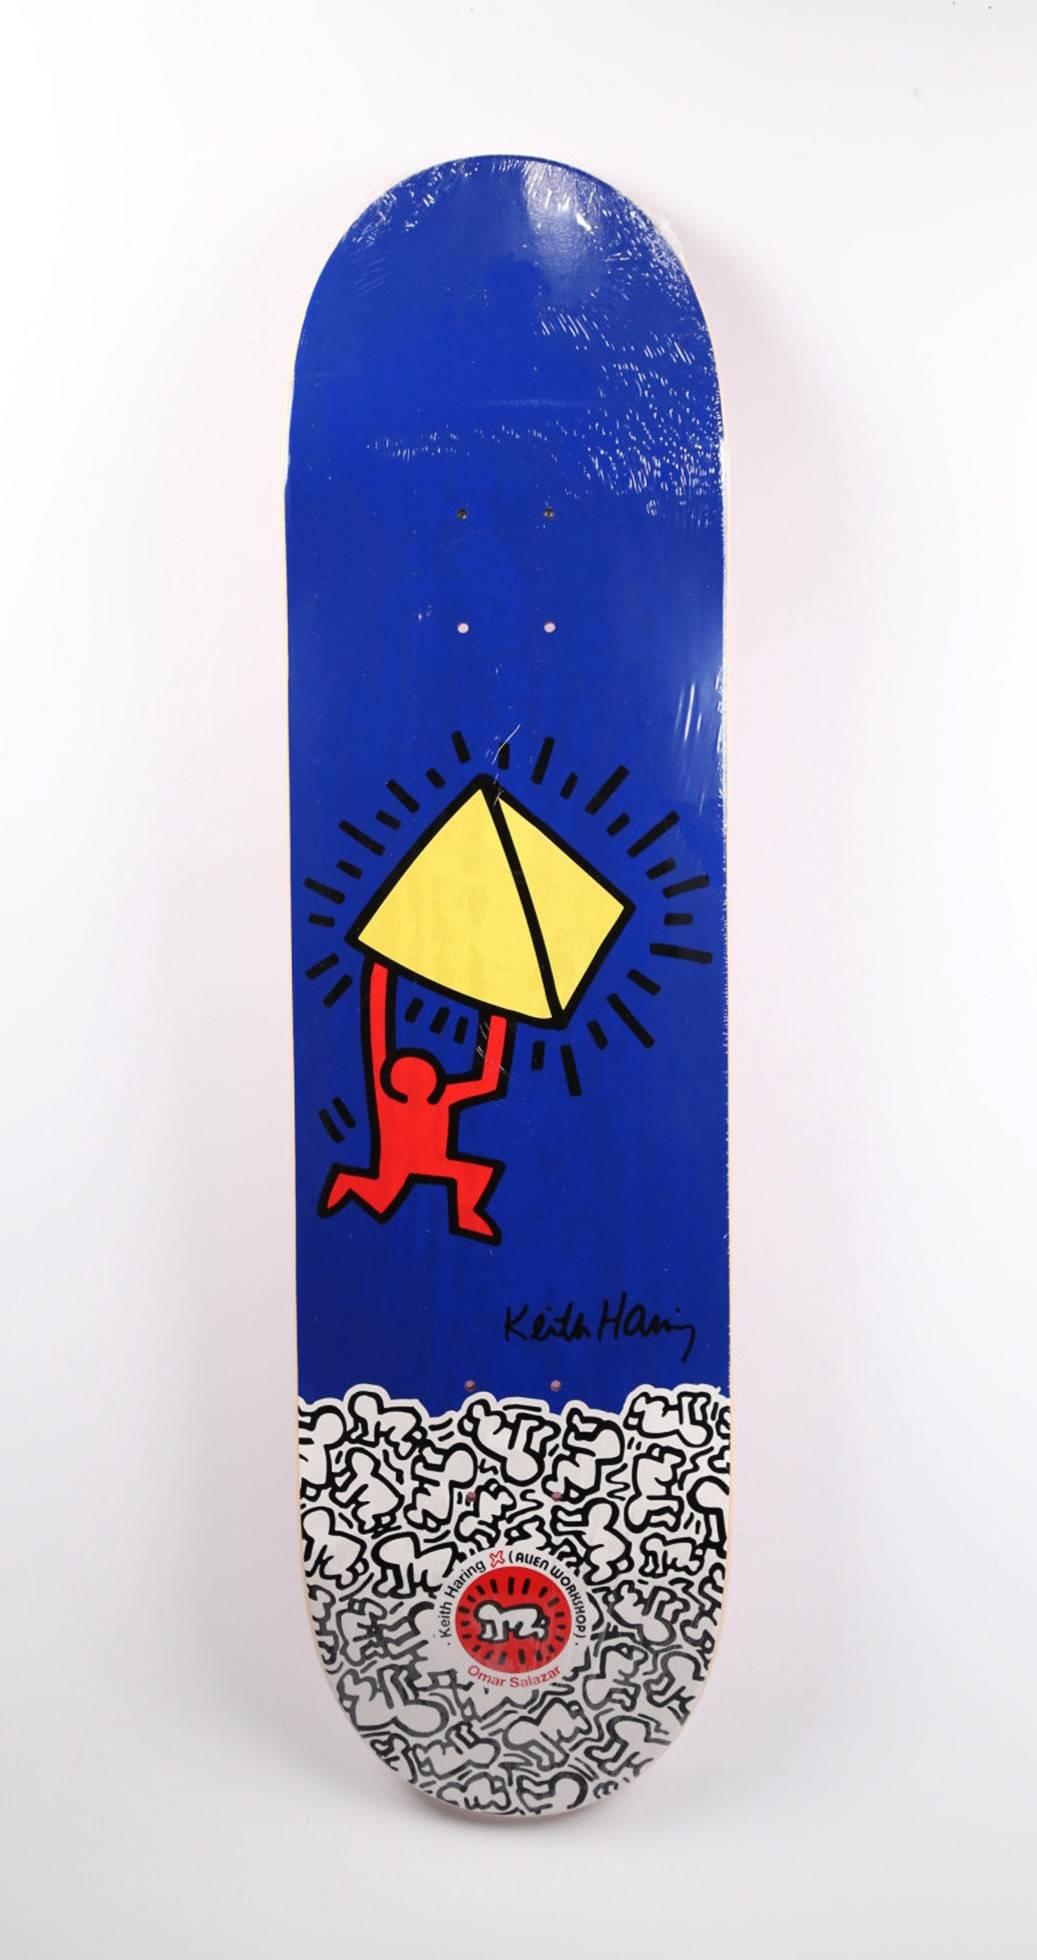 Keith Haring: A Complete Set of 10 Skate Decks 1